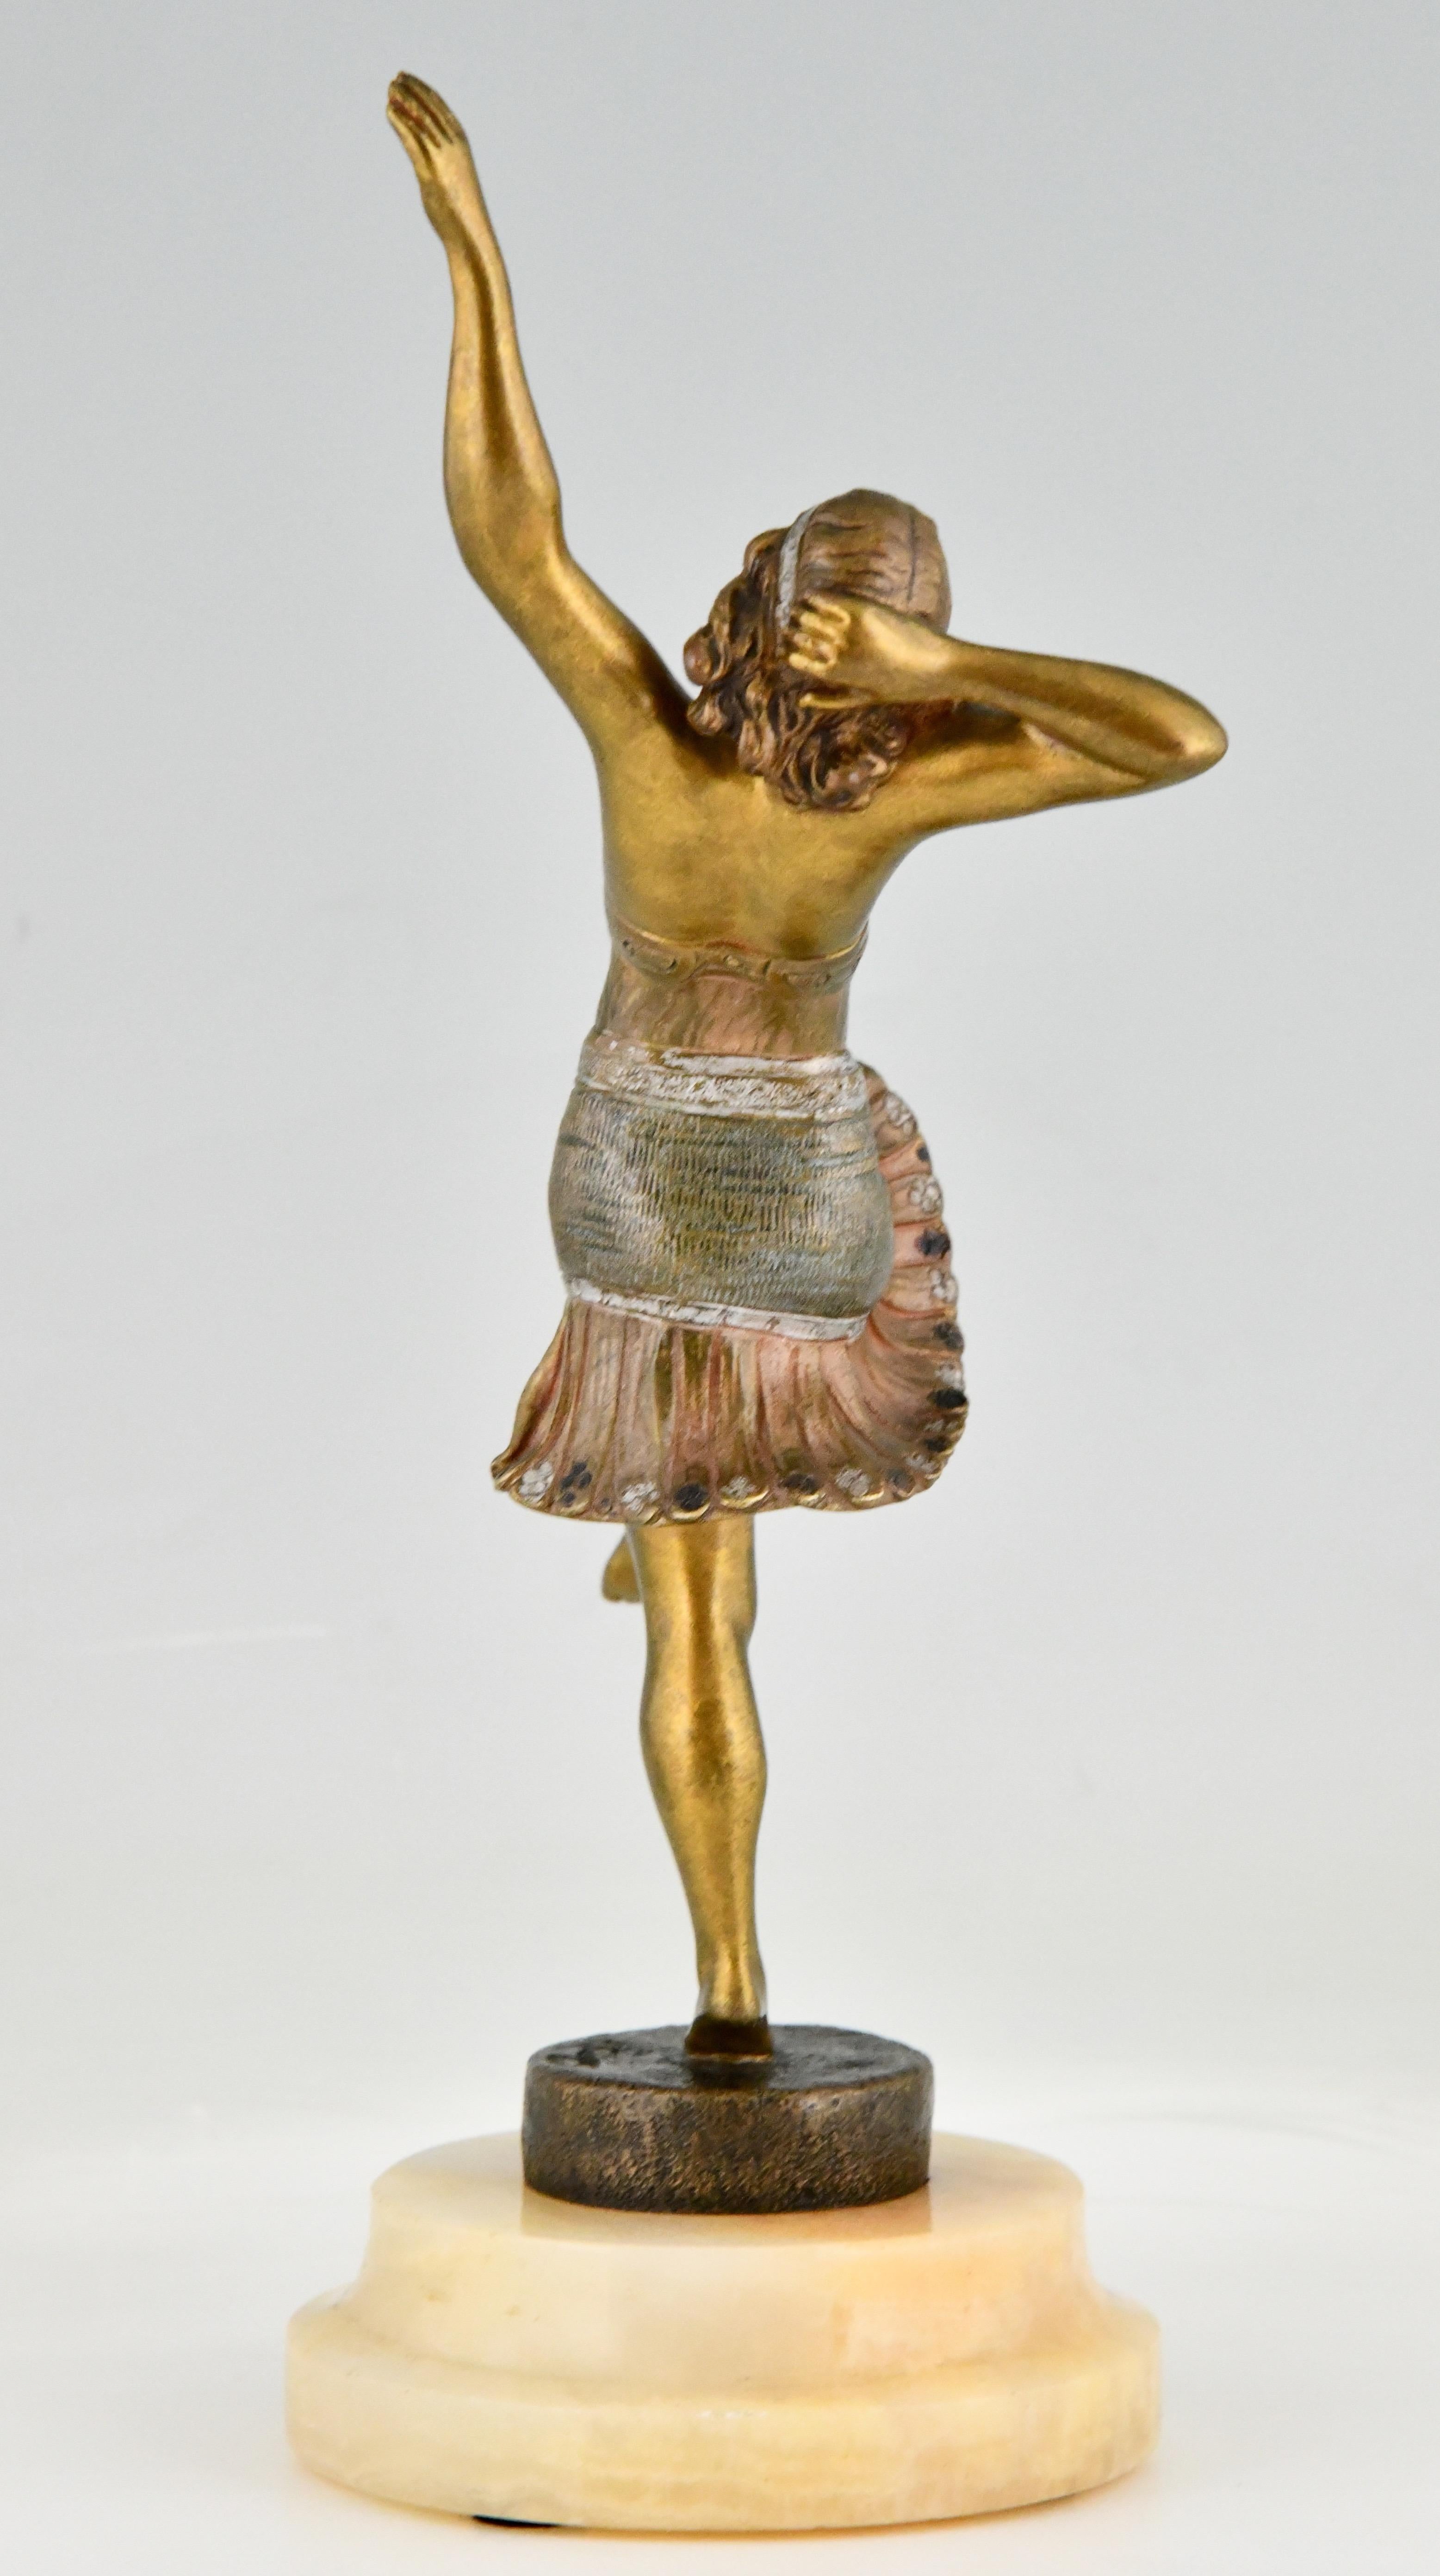 Early 20th Century Art Deco Bronze Sculpture of a Dancer Signed by Henry Fugère 1925